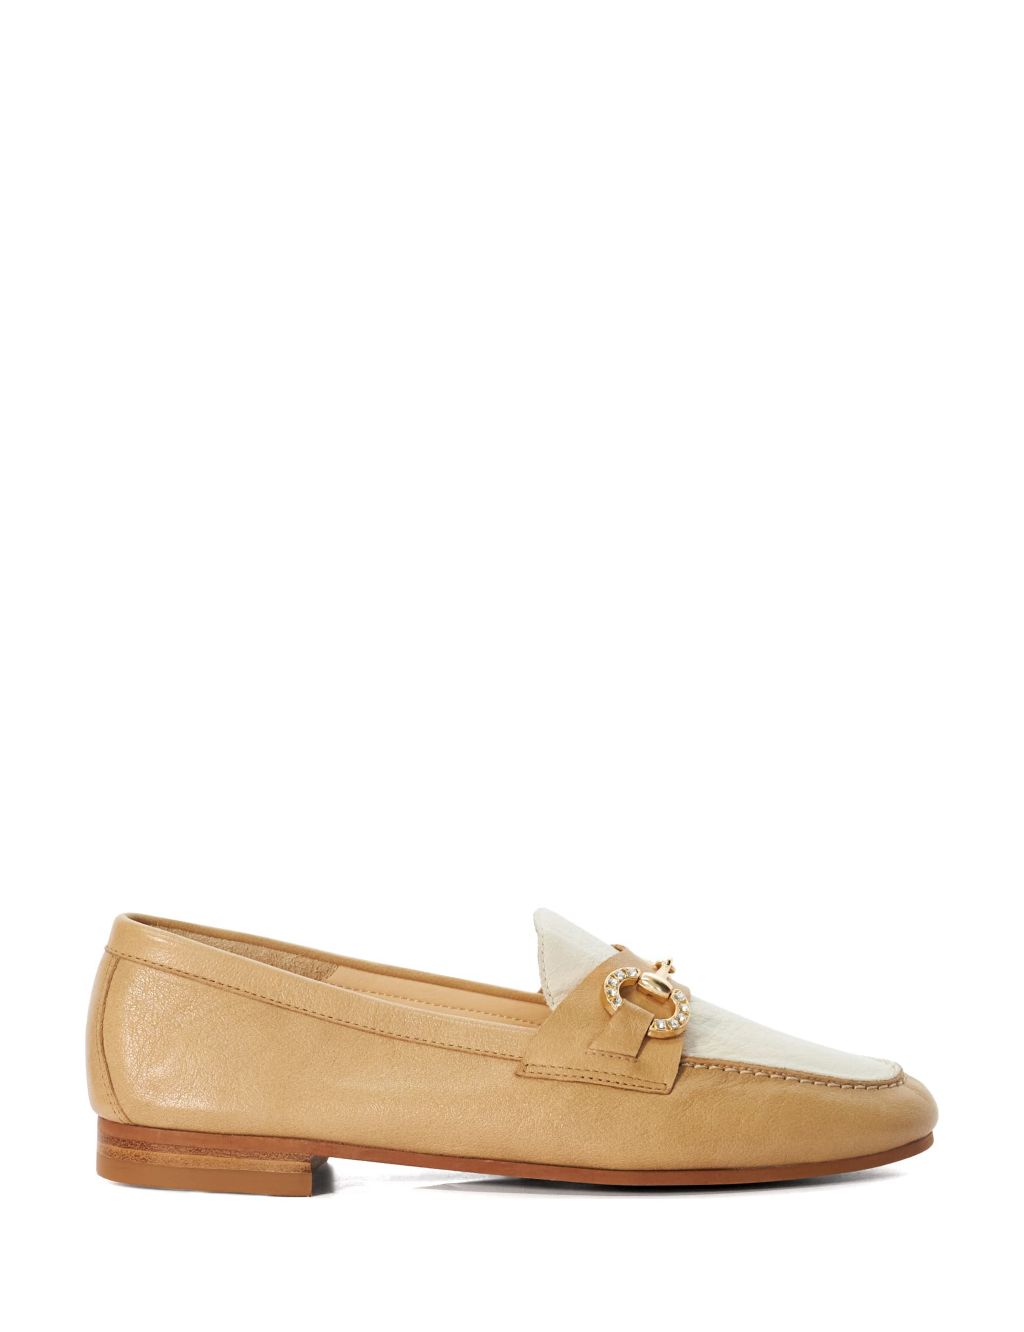 Leather Bar Slip On Flat Loafers